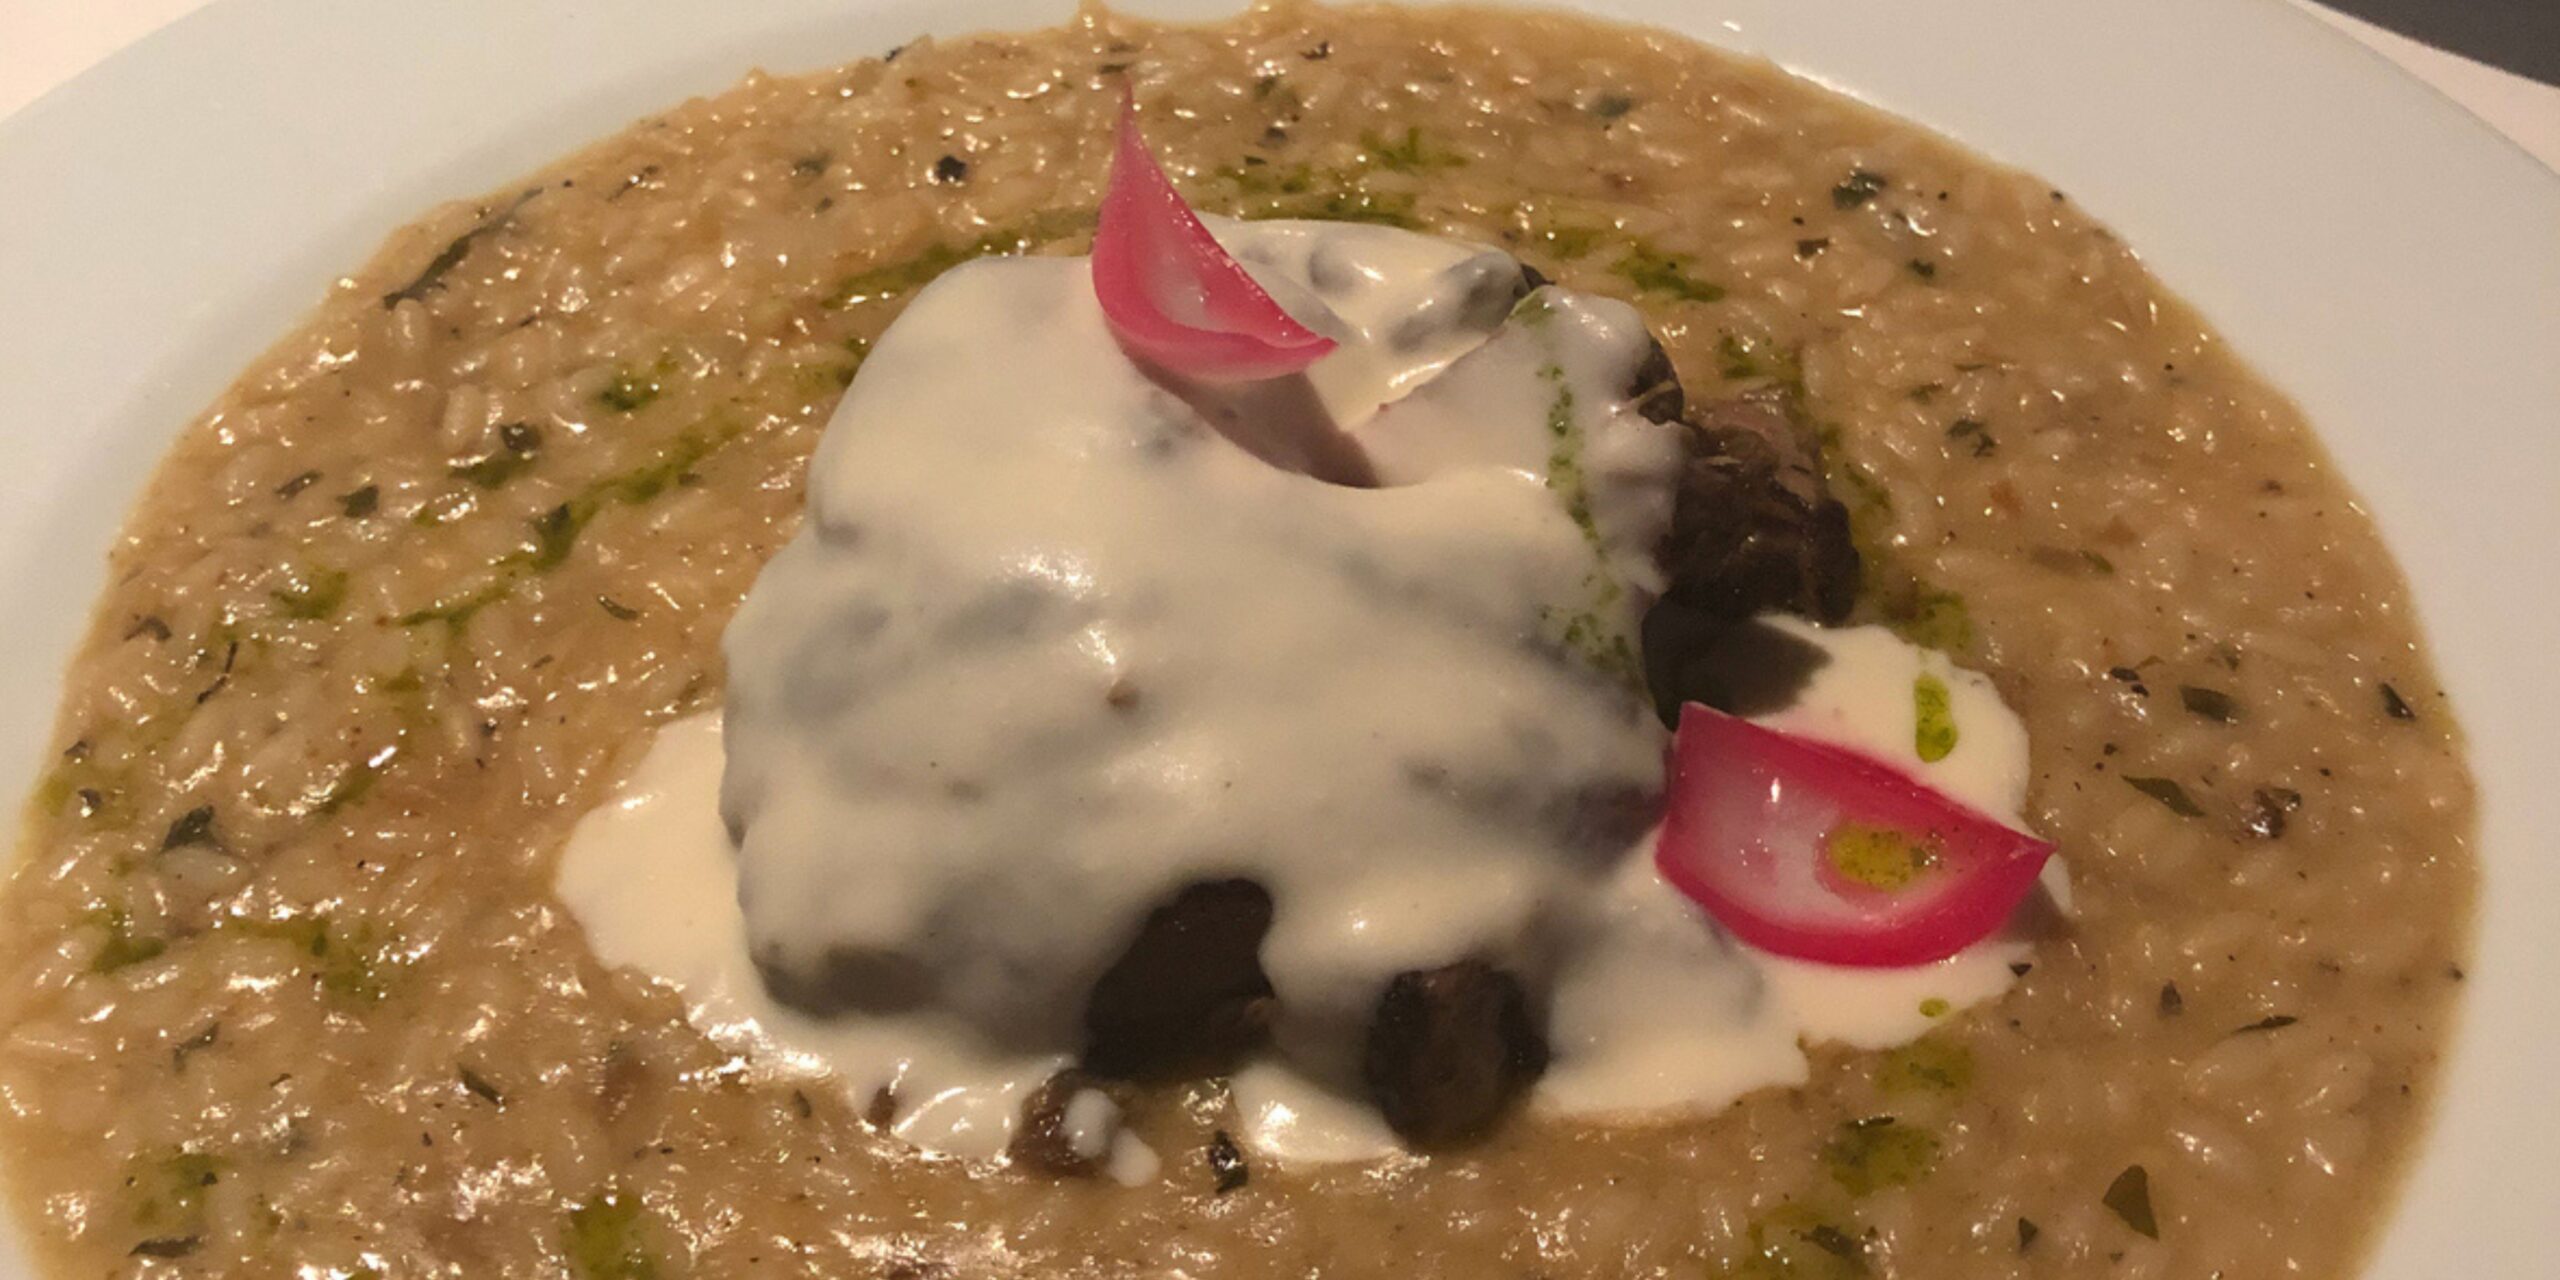 Gamopilafo with a creamy sauce, garnished with herbs and radish slices.